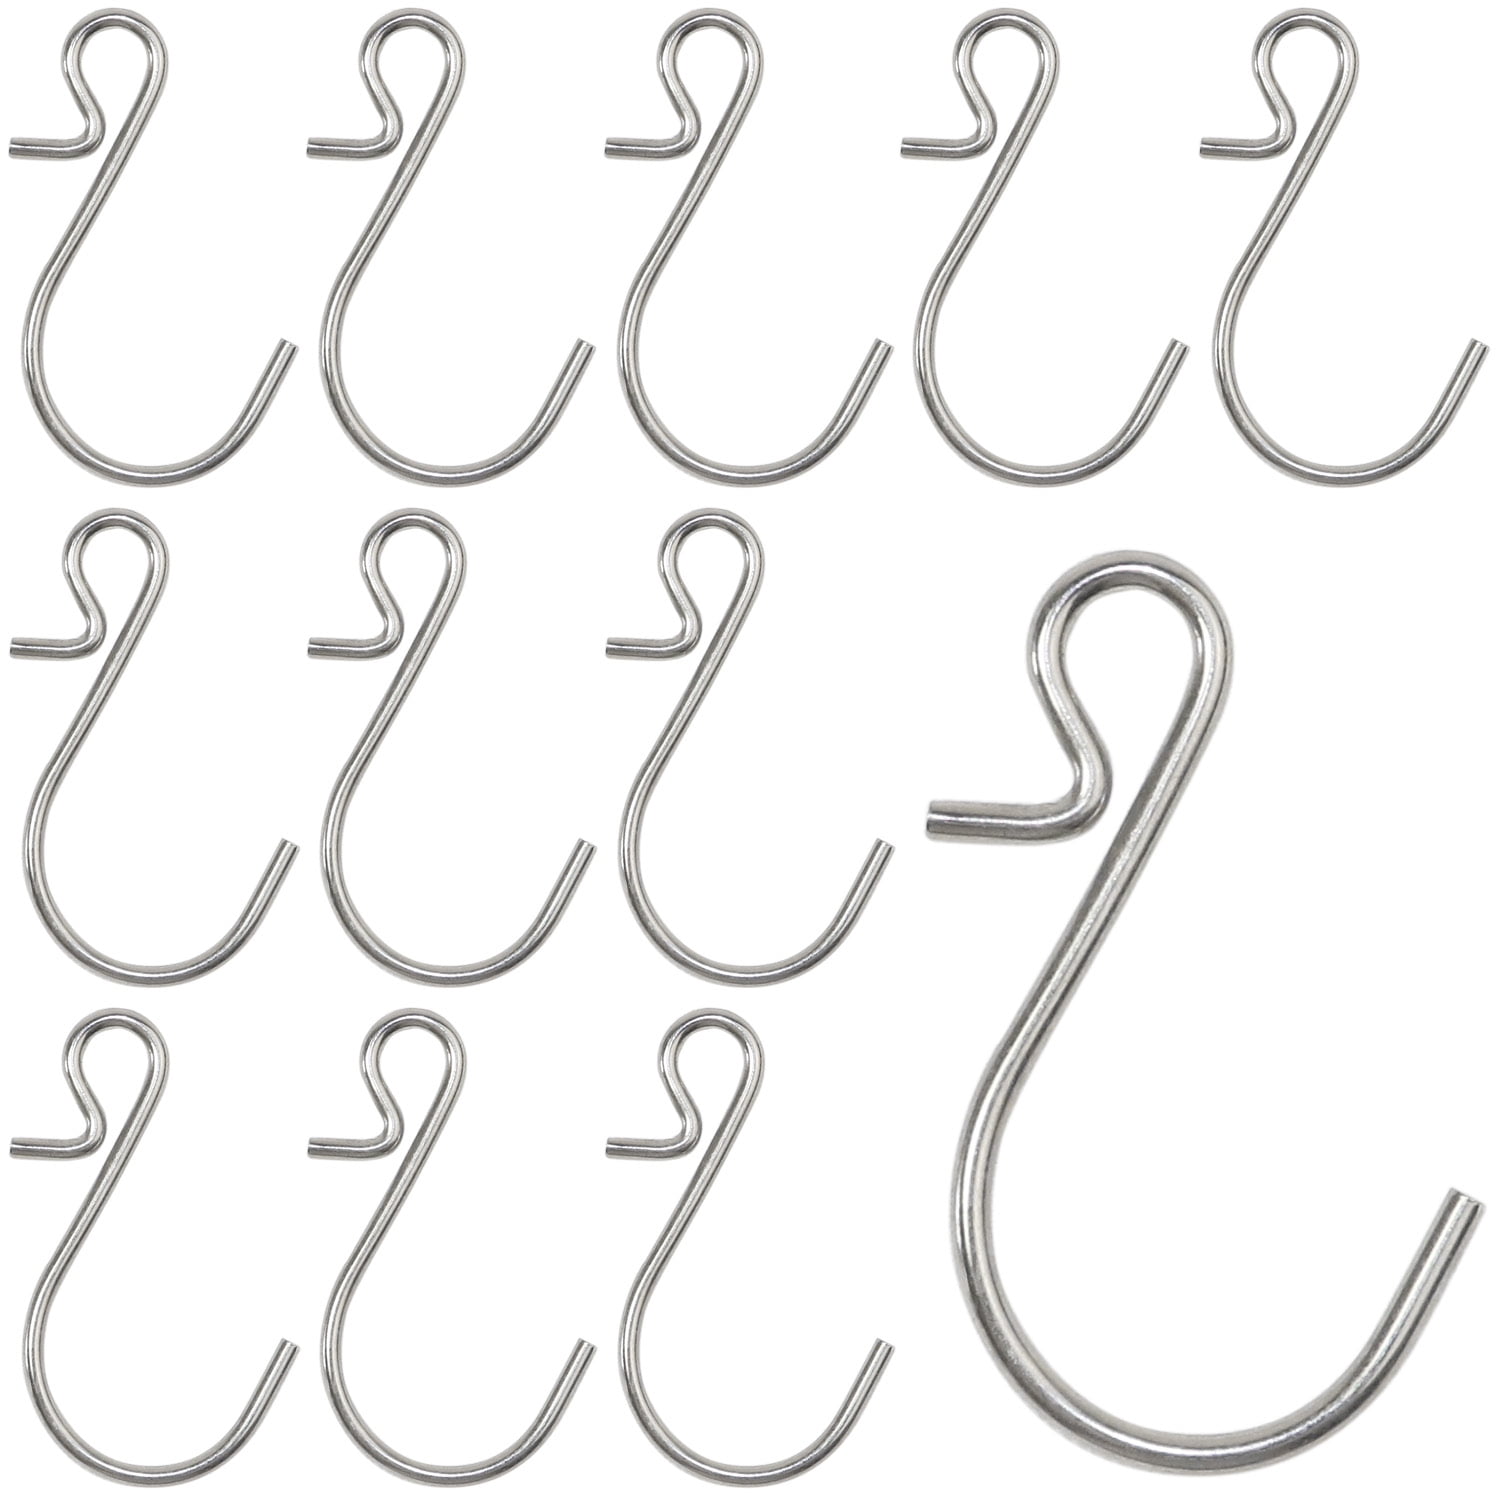 75pcs Small S Hooks Connectors Metal S Shaped Wire Hook Hangers Hanging  Hooks for DIY Crafts, Hanging Jewelry, Key Chain, Tags, Fishing Lure, Net